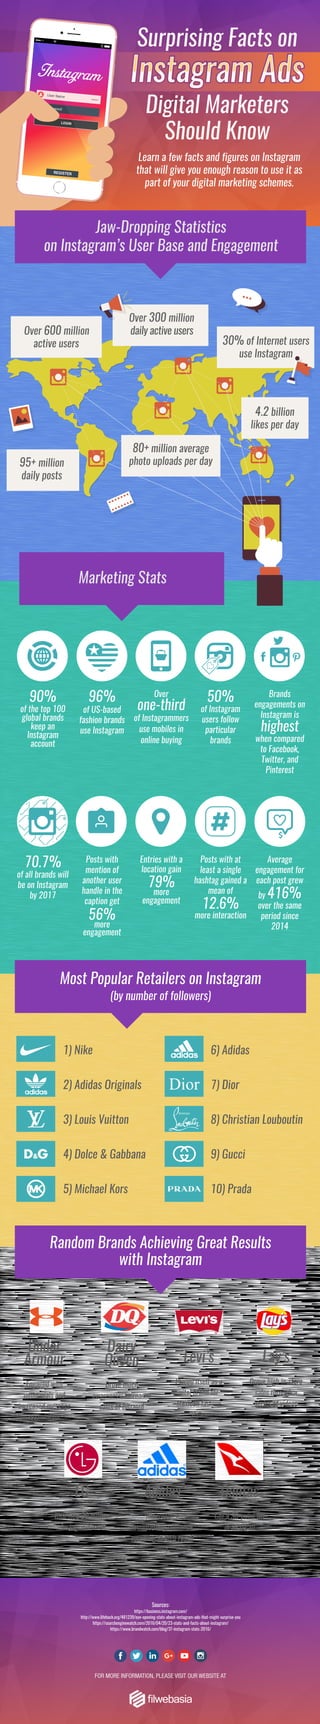 Surprising Facts on Instagram Ads Digital Marketers Should Know [Infographic]